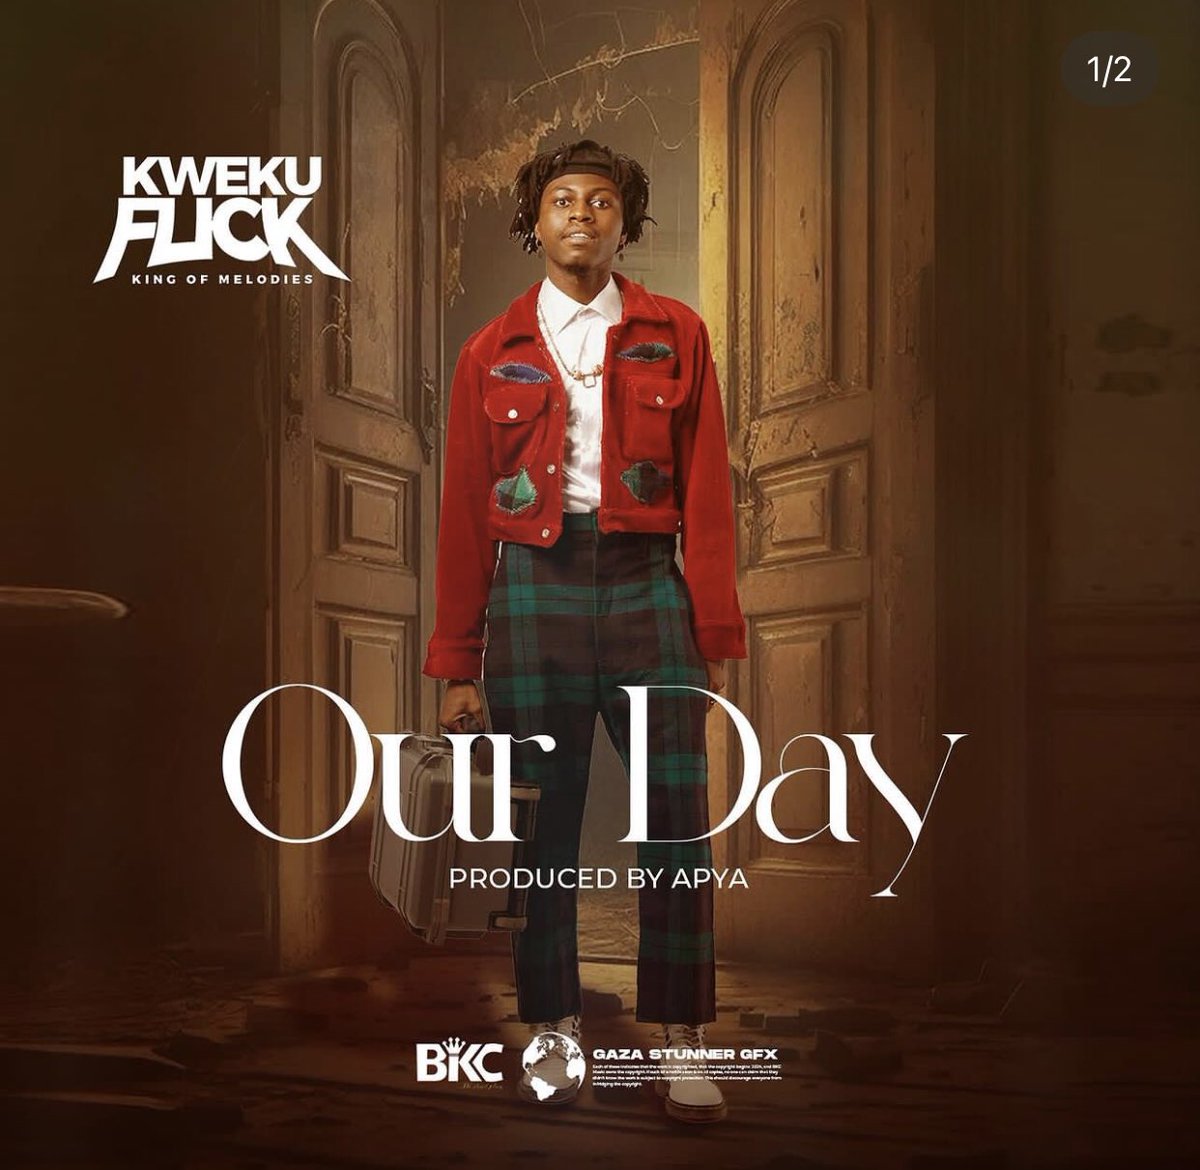 Mystreetz World Music Show Is Live on @vybz945fmlagos : Now Playin ▶️ Our Day
By @KwekuFlick 
#mystreetzworldmusicshow #mystreetzmagazine #vybz945fm | @Mystreetzmag